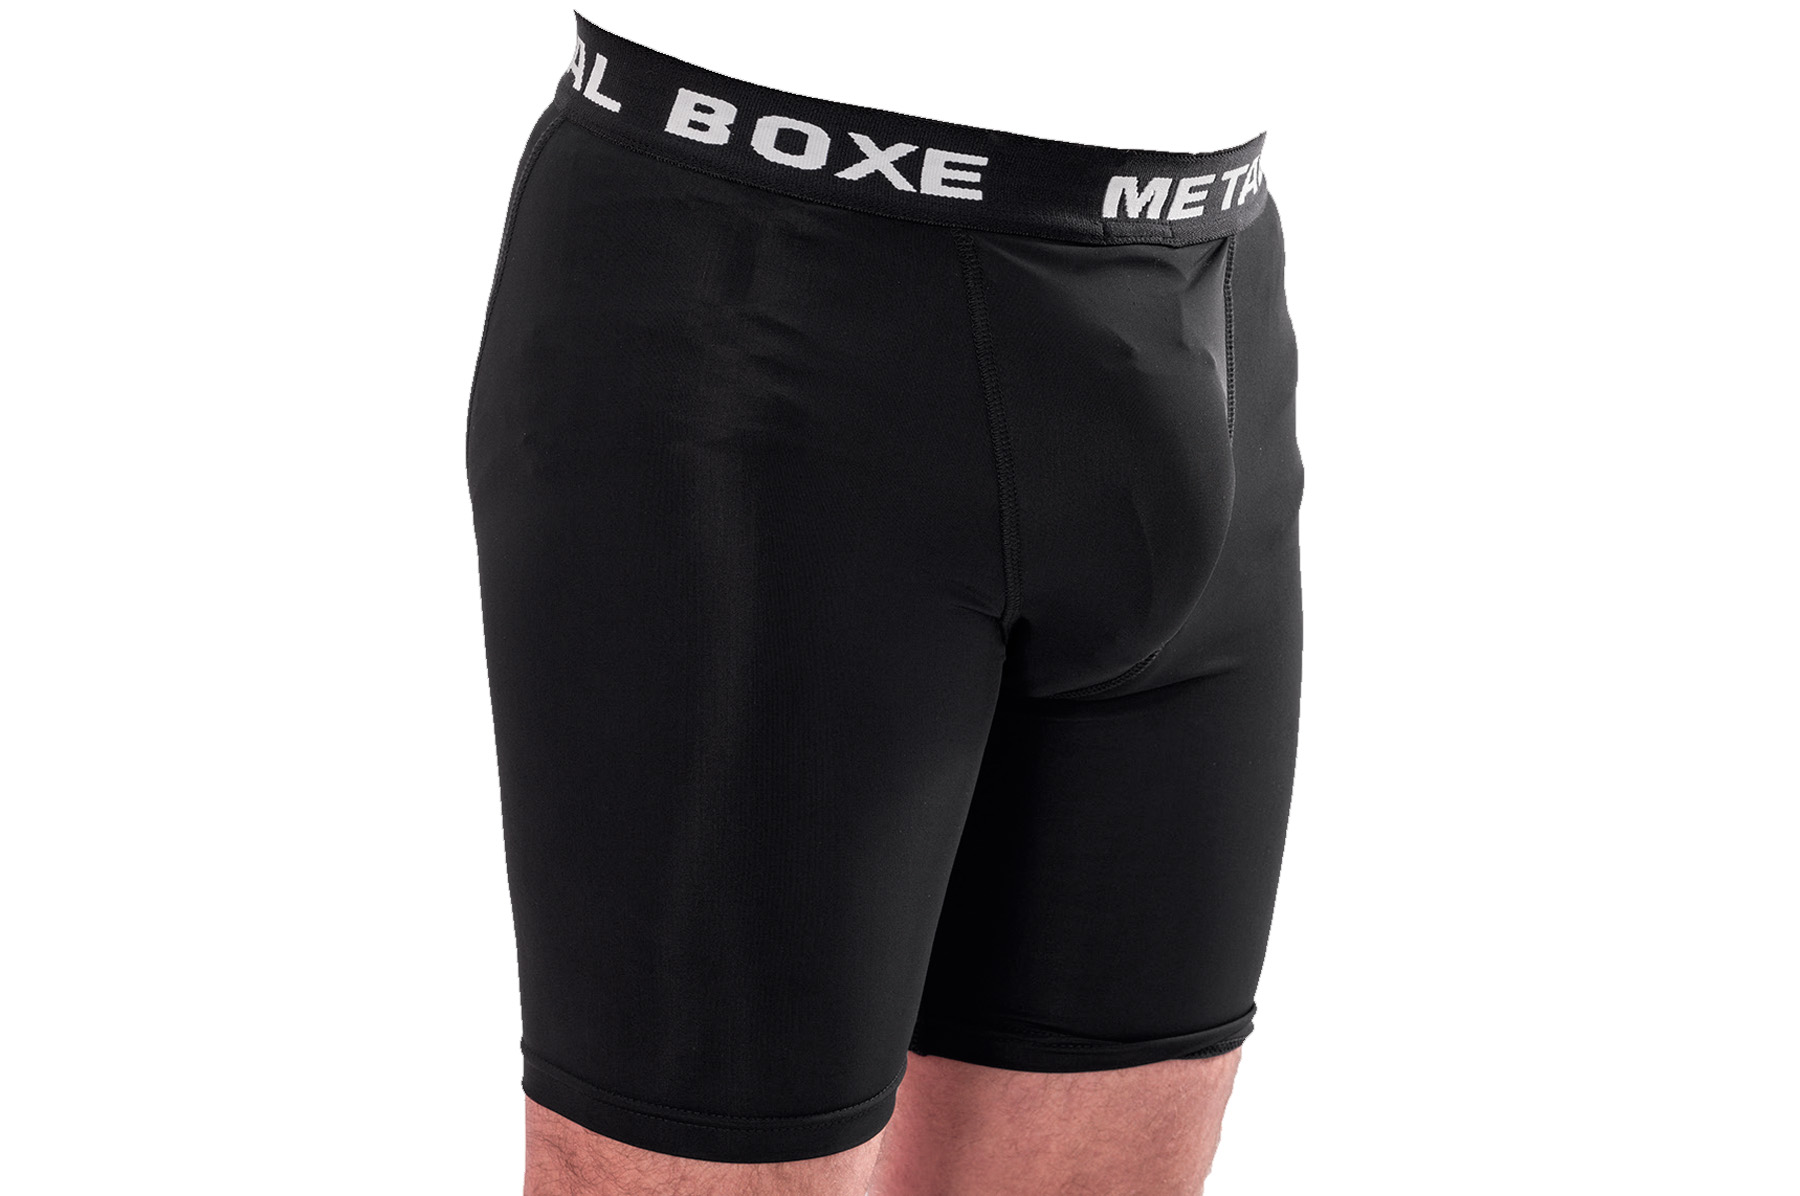 SLIP COQUILLE HOMME METAL BOXE 